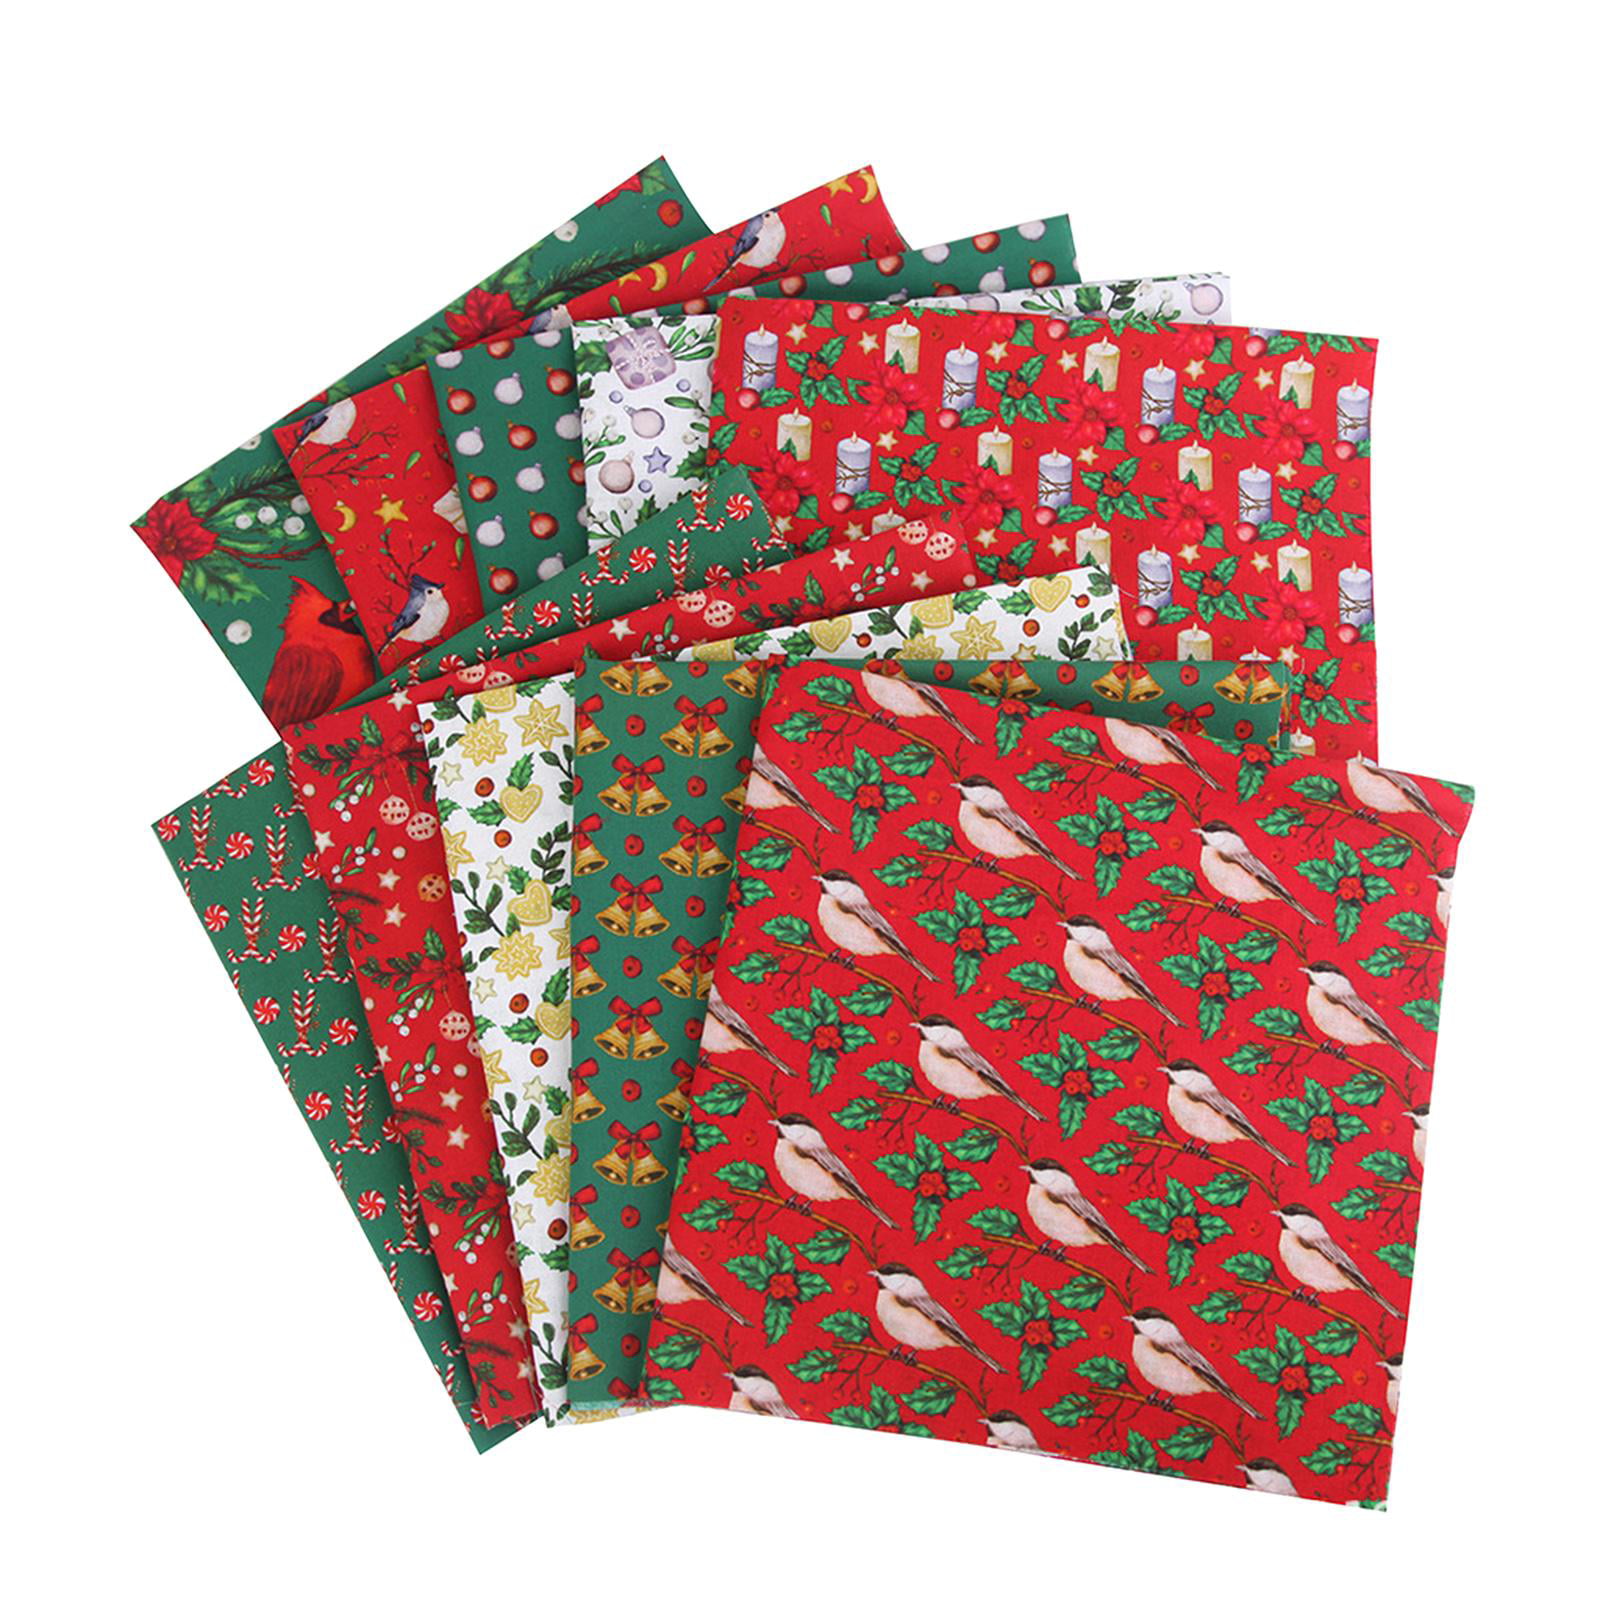 42 Pieces Christmas Fabric Quilting Squares 10 x 10 Inch Christmas Plaid  Stripe Green Red Quilting Fall Fabric Craft for Patchwork Sewing DIY Craft